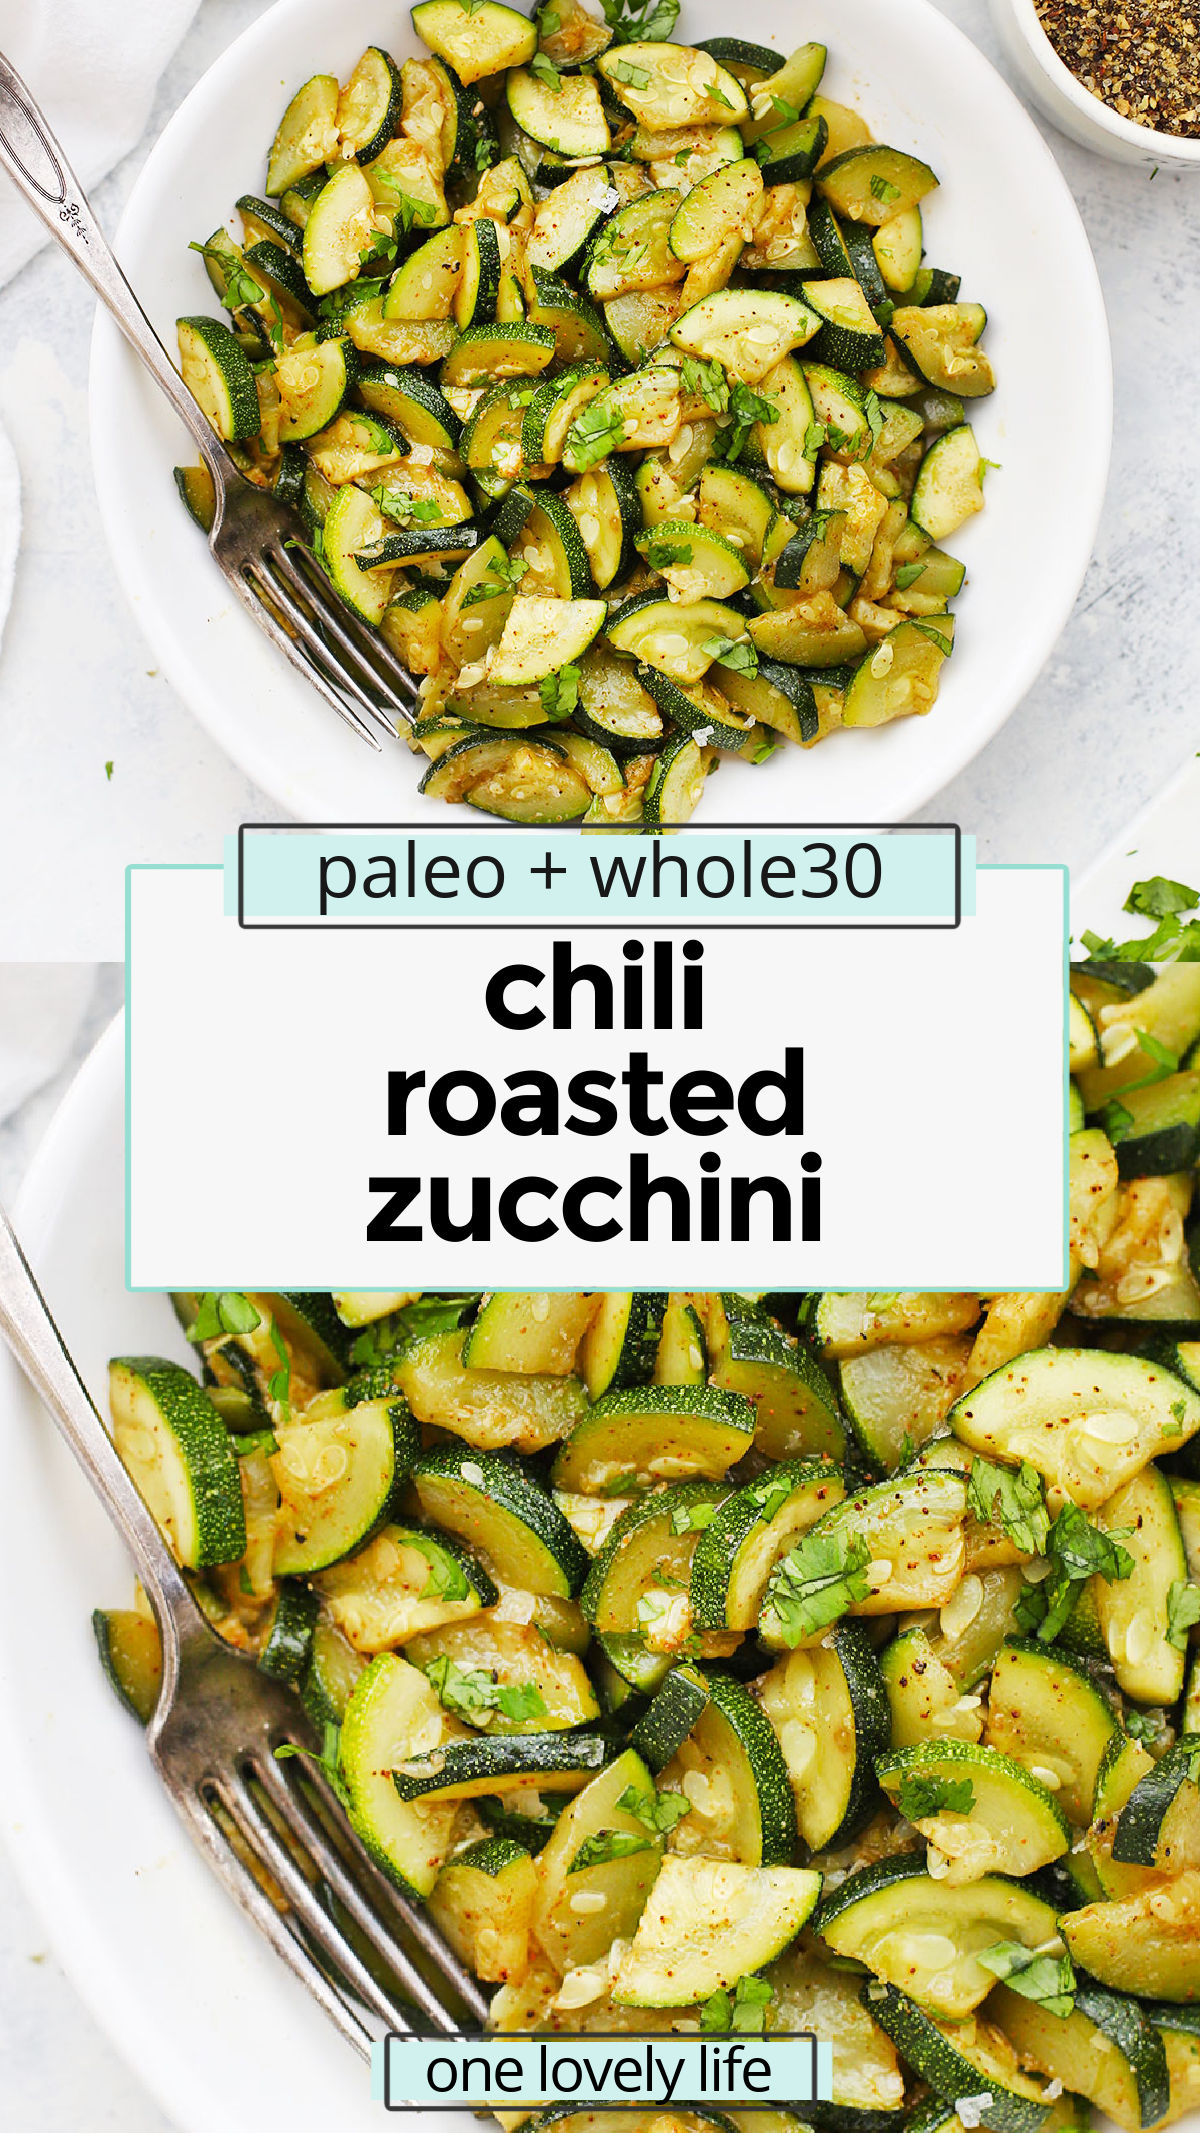 Chili Roasted Zucchini - This easy zucchini recipe is one of our favorites. Simple spices make these zucchini wedges the perfect easy side dish! (Paleo, Vegan, and Whole30 approved!) // Gluten free // roasted zucchini recipe // the best roasted zucchini recipe // paleo side dish // whole30 side dish // healthy vegetable recipe // vegan side dish // roasted veggies